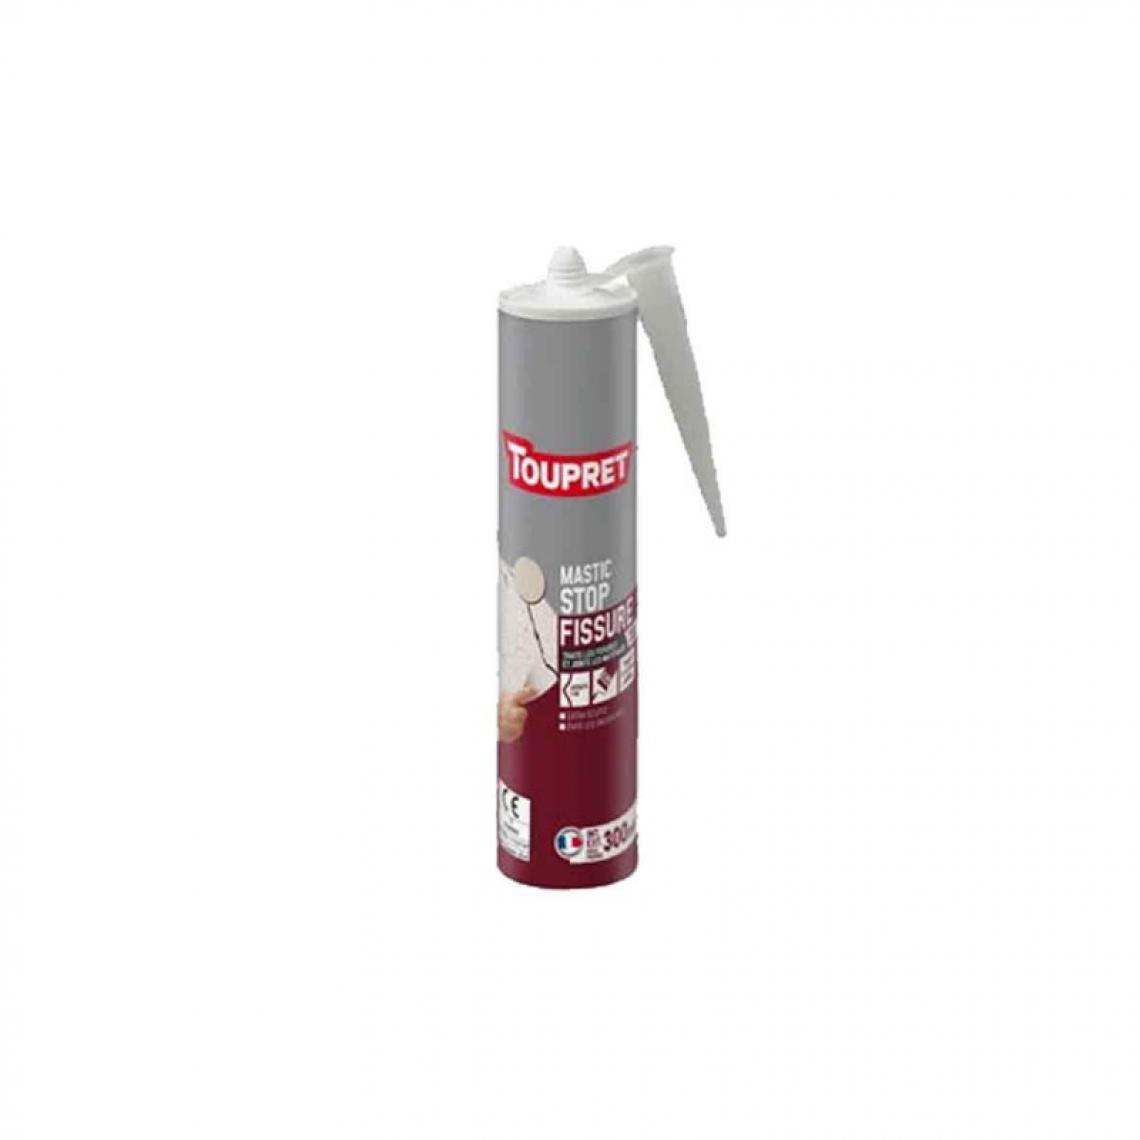 Toupret - Mastic Stop fissures TOUPRET 300ml Blanc - BCMACEXB300 - Mastic, silicone, joint